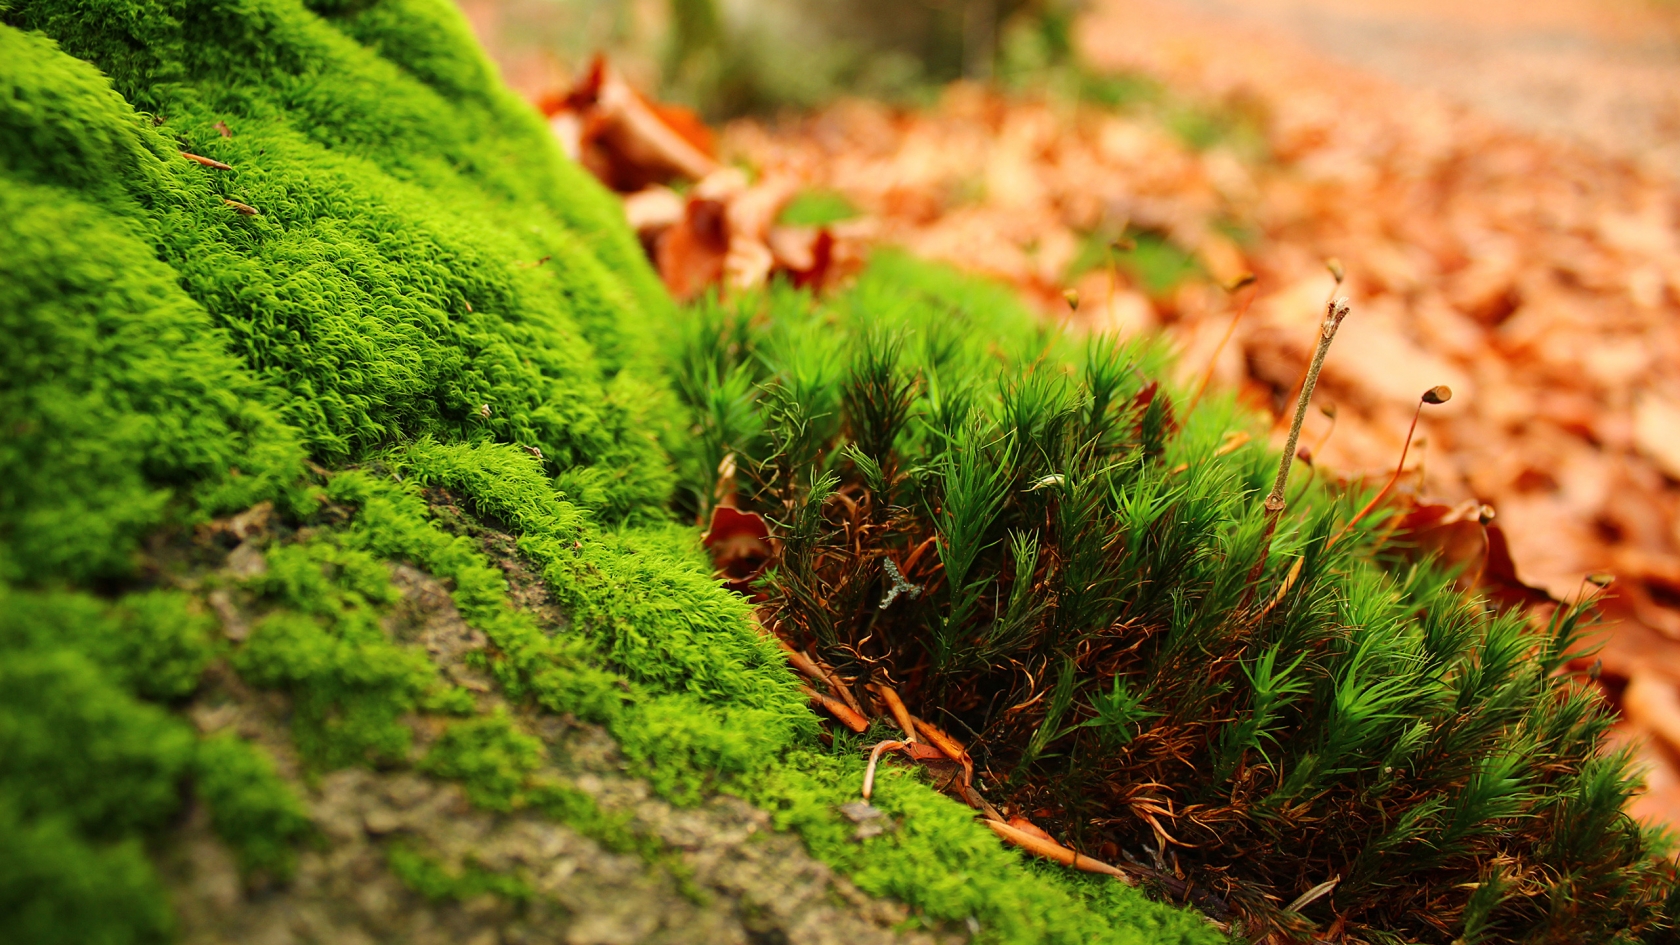 Amazing Moss for 1680 x 945 HDTV resolution